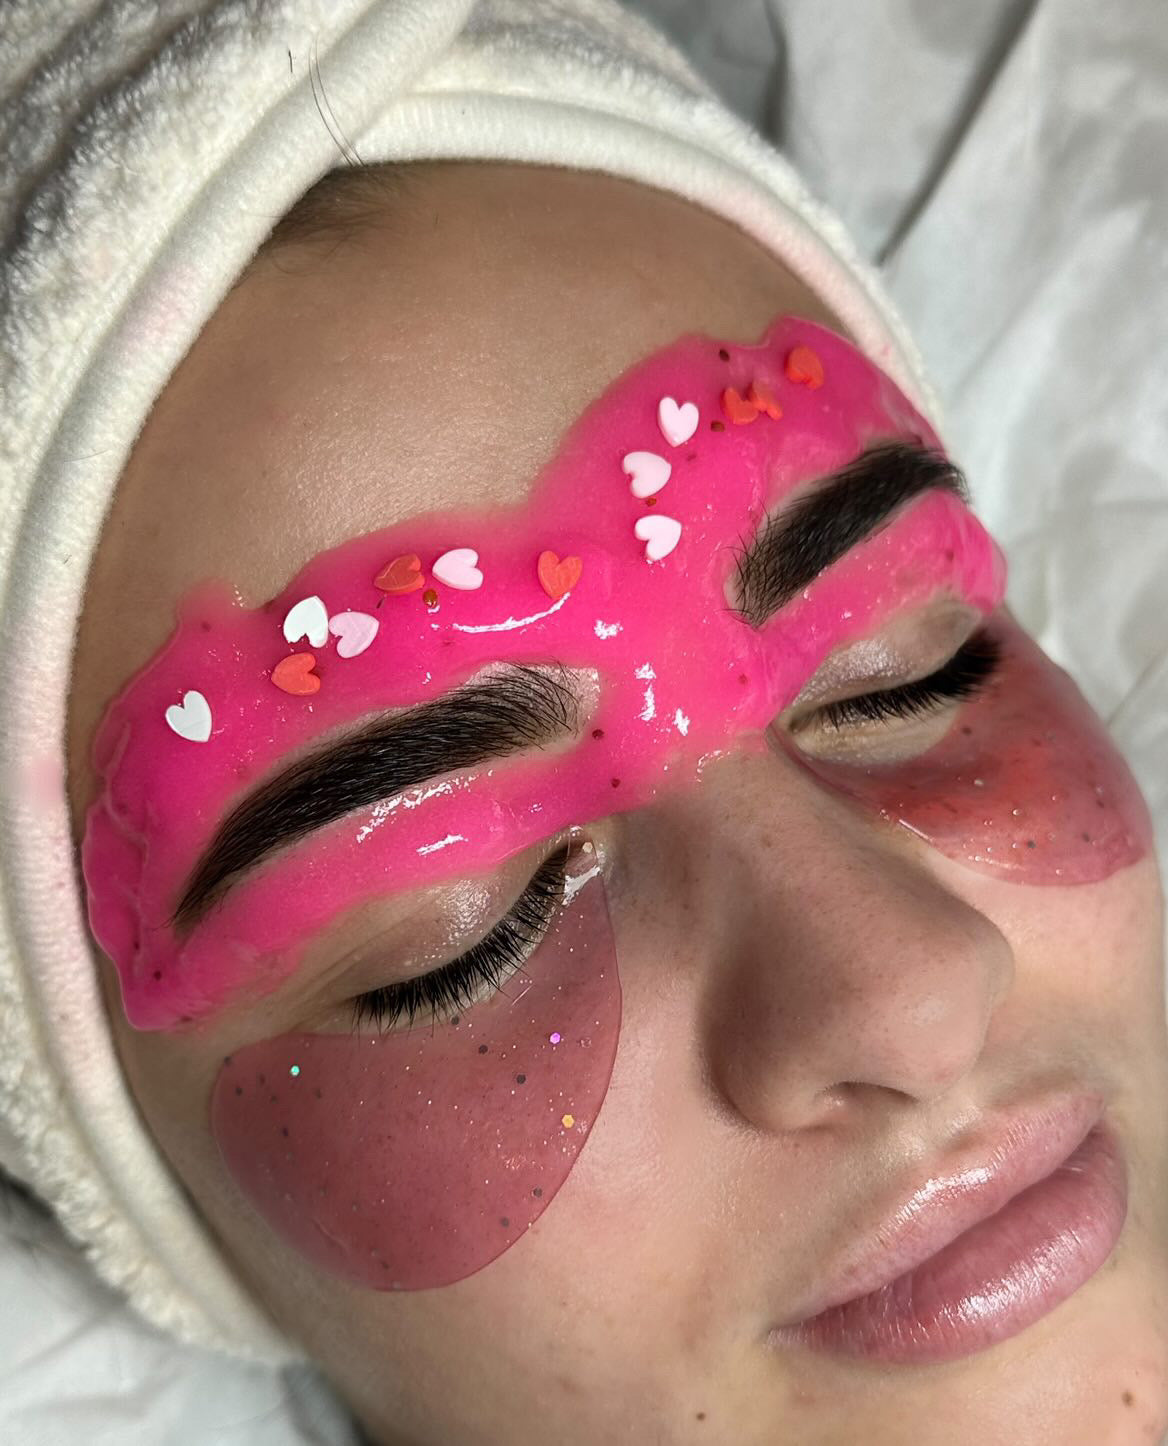 HYDROJELLY EYE MASKS BROWS BUT MAKE IT ART - 30 pairs